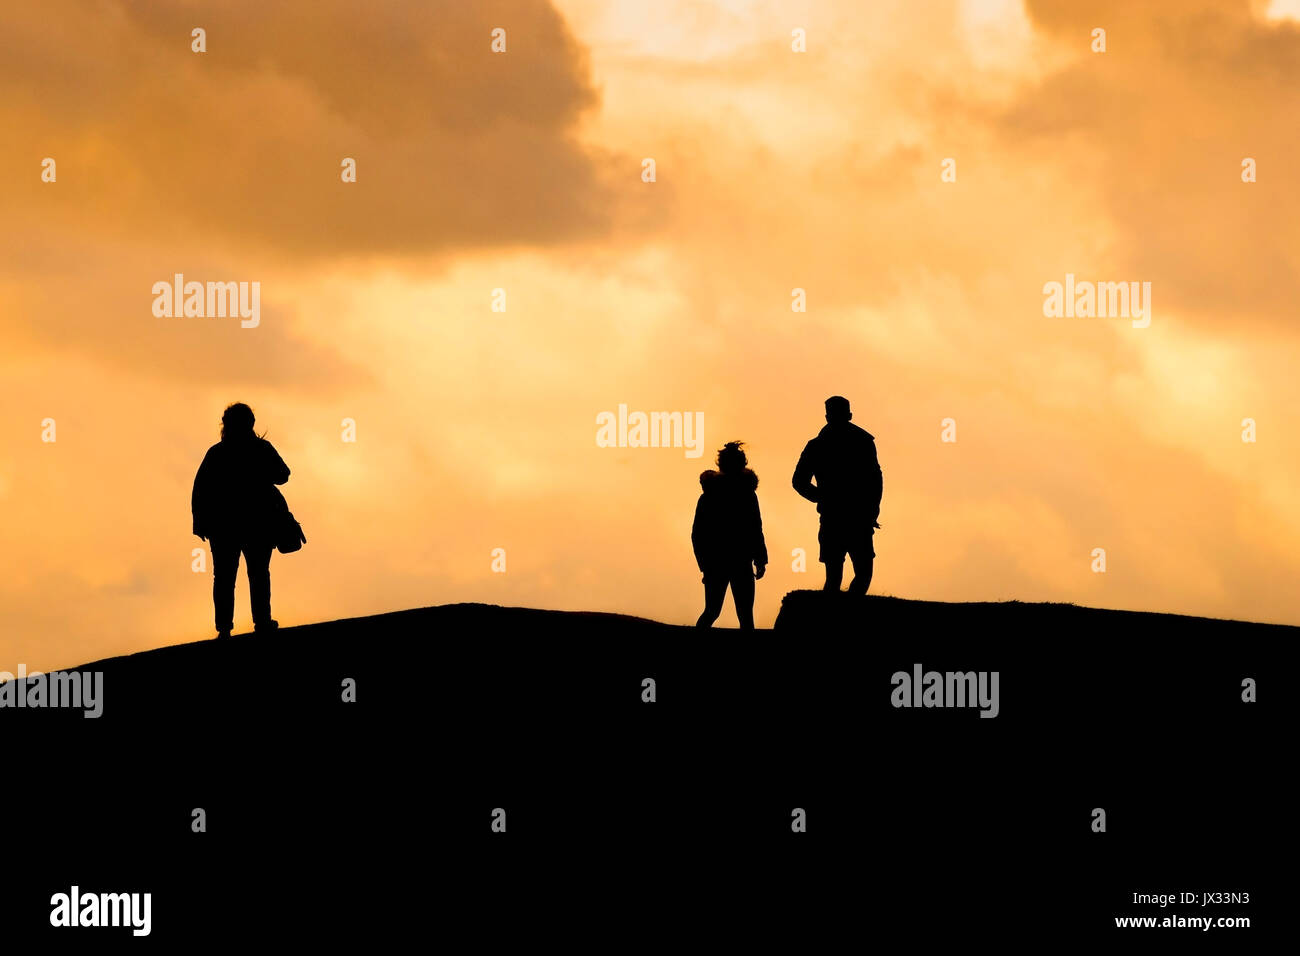 Three people silhouetted against the sky at sunset; Stock Photo